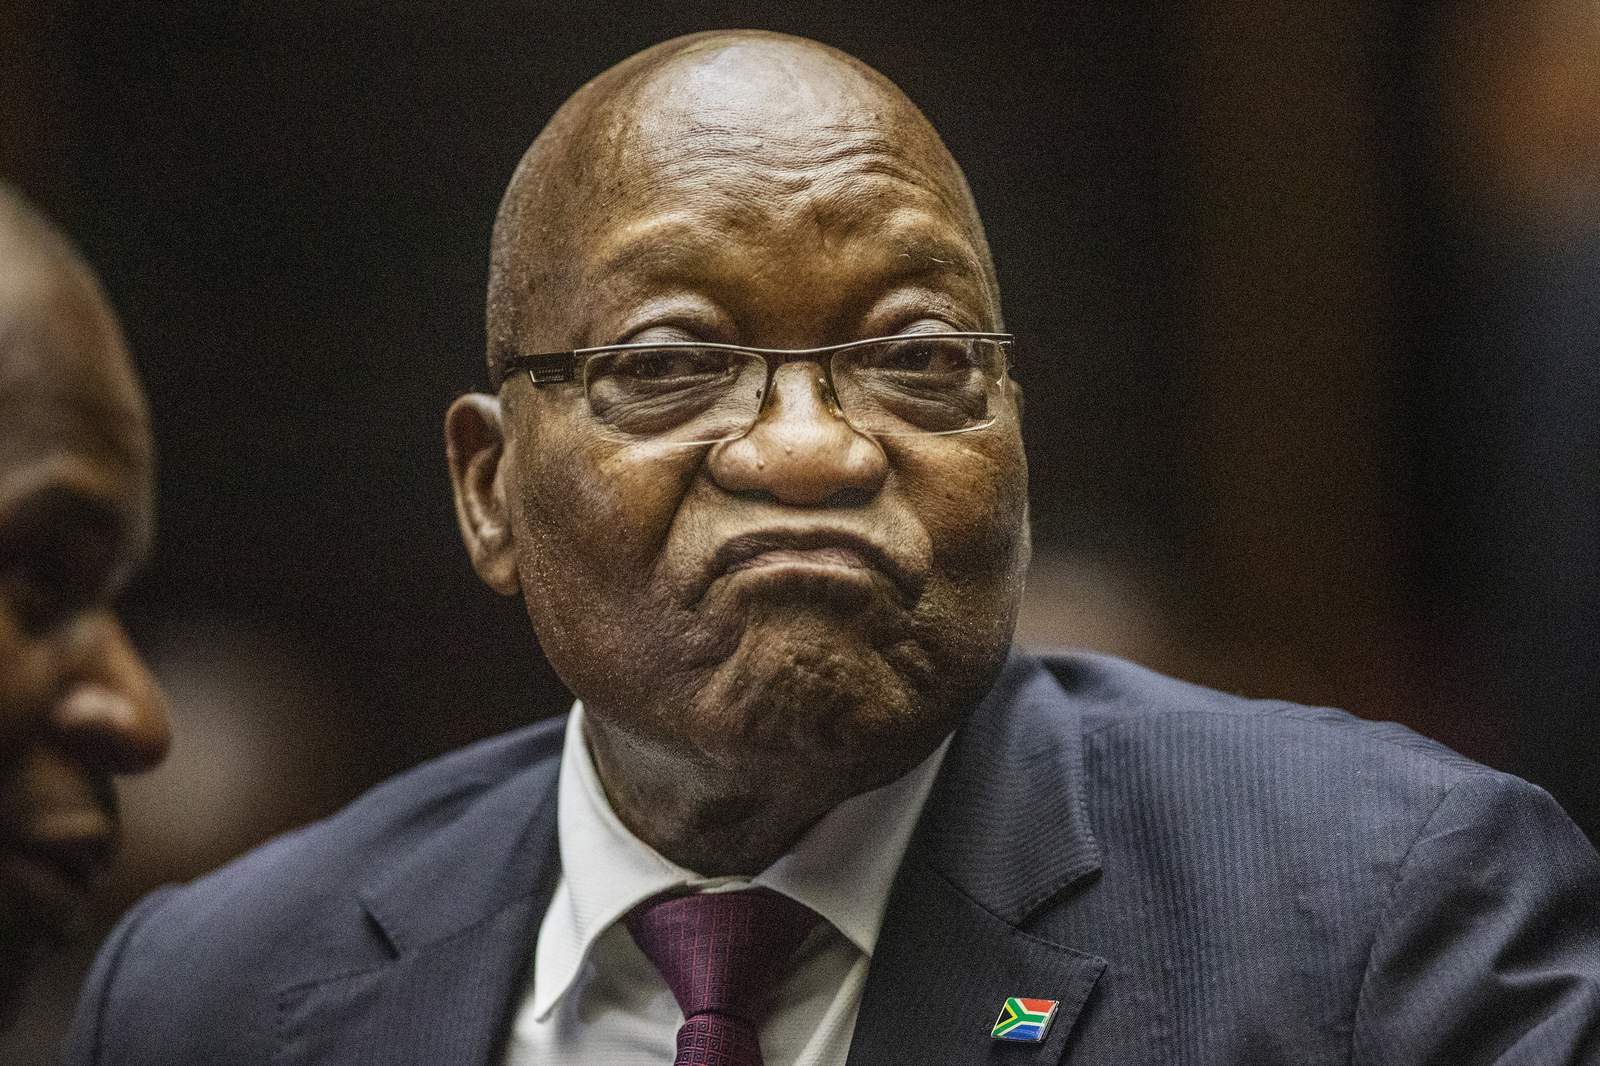 The legal woes of former South African president Jacob Zuma